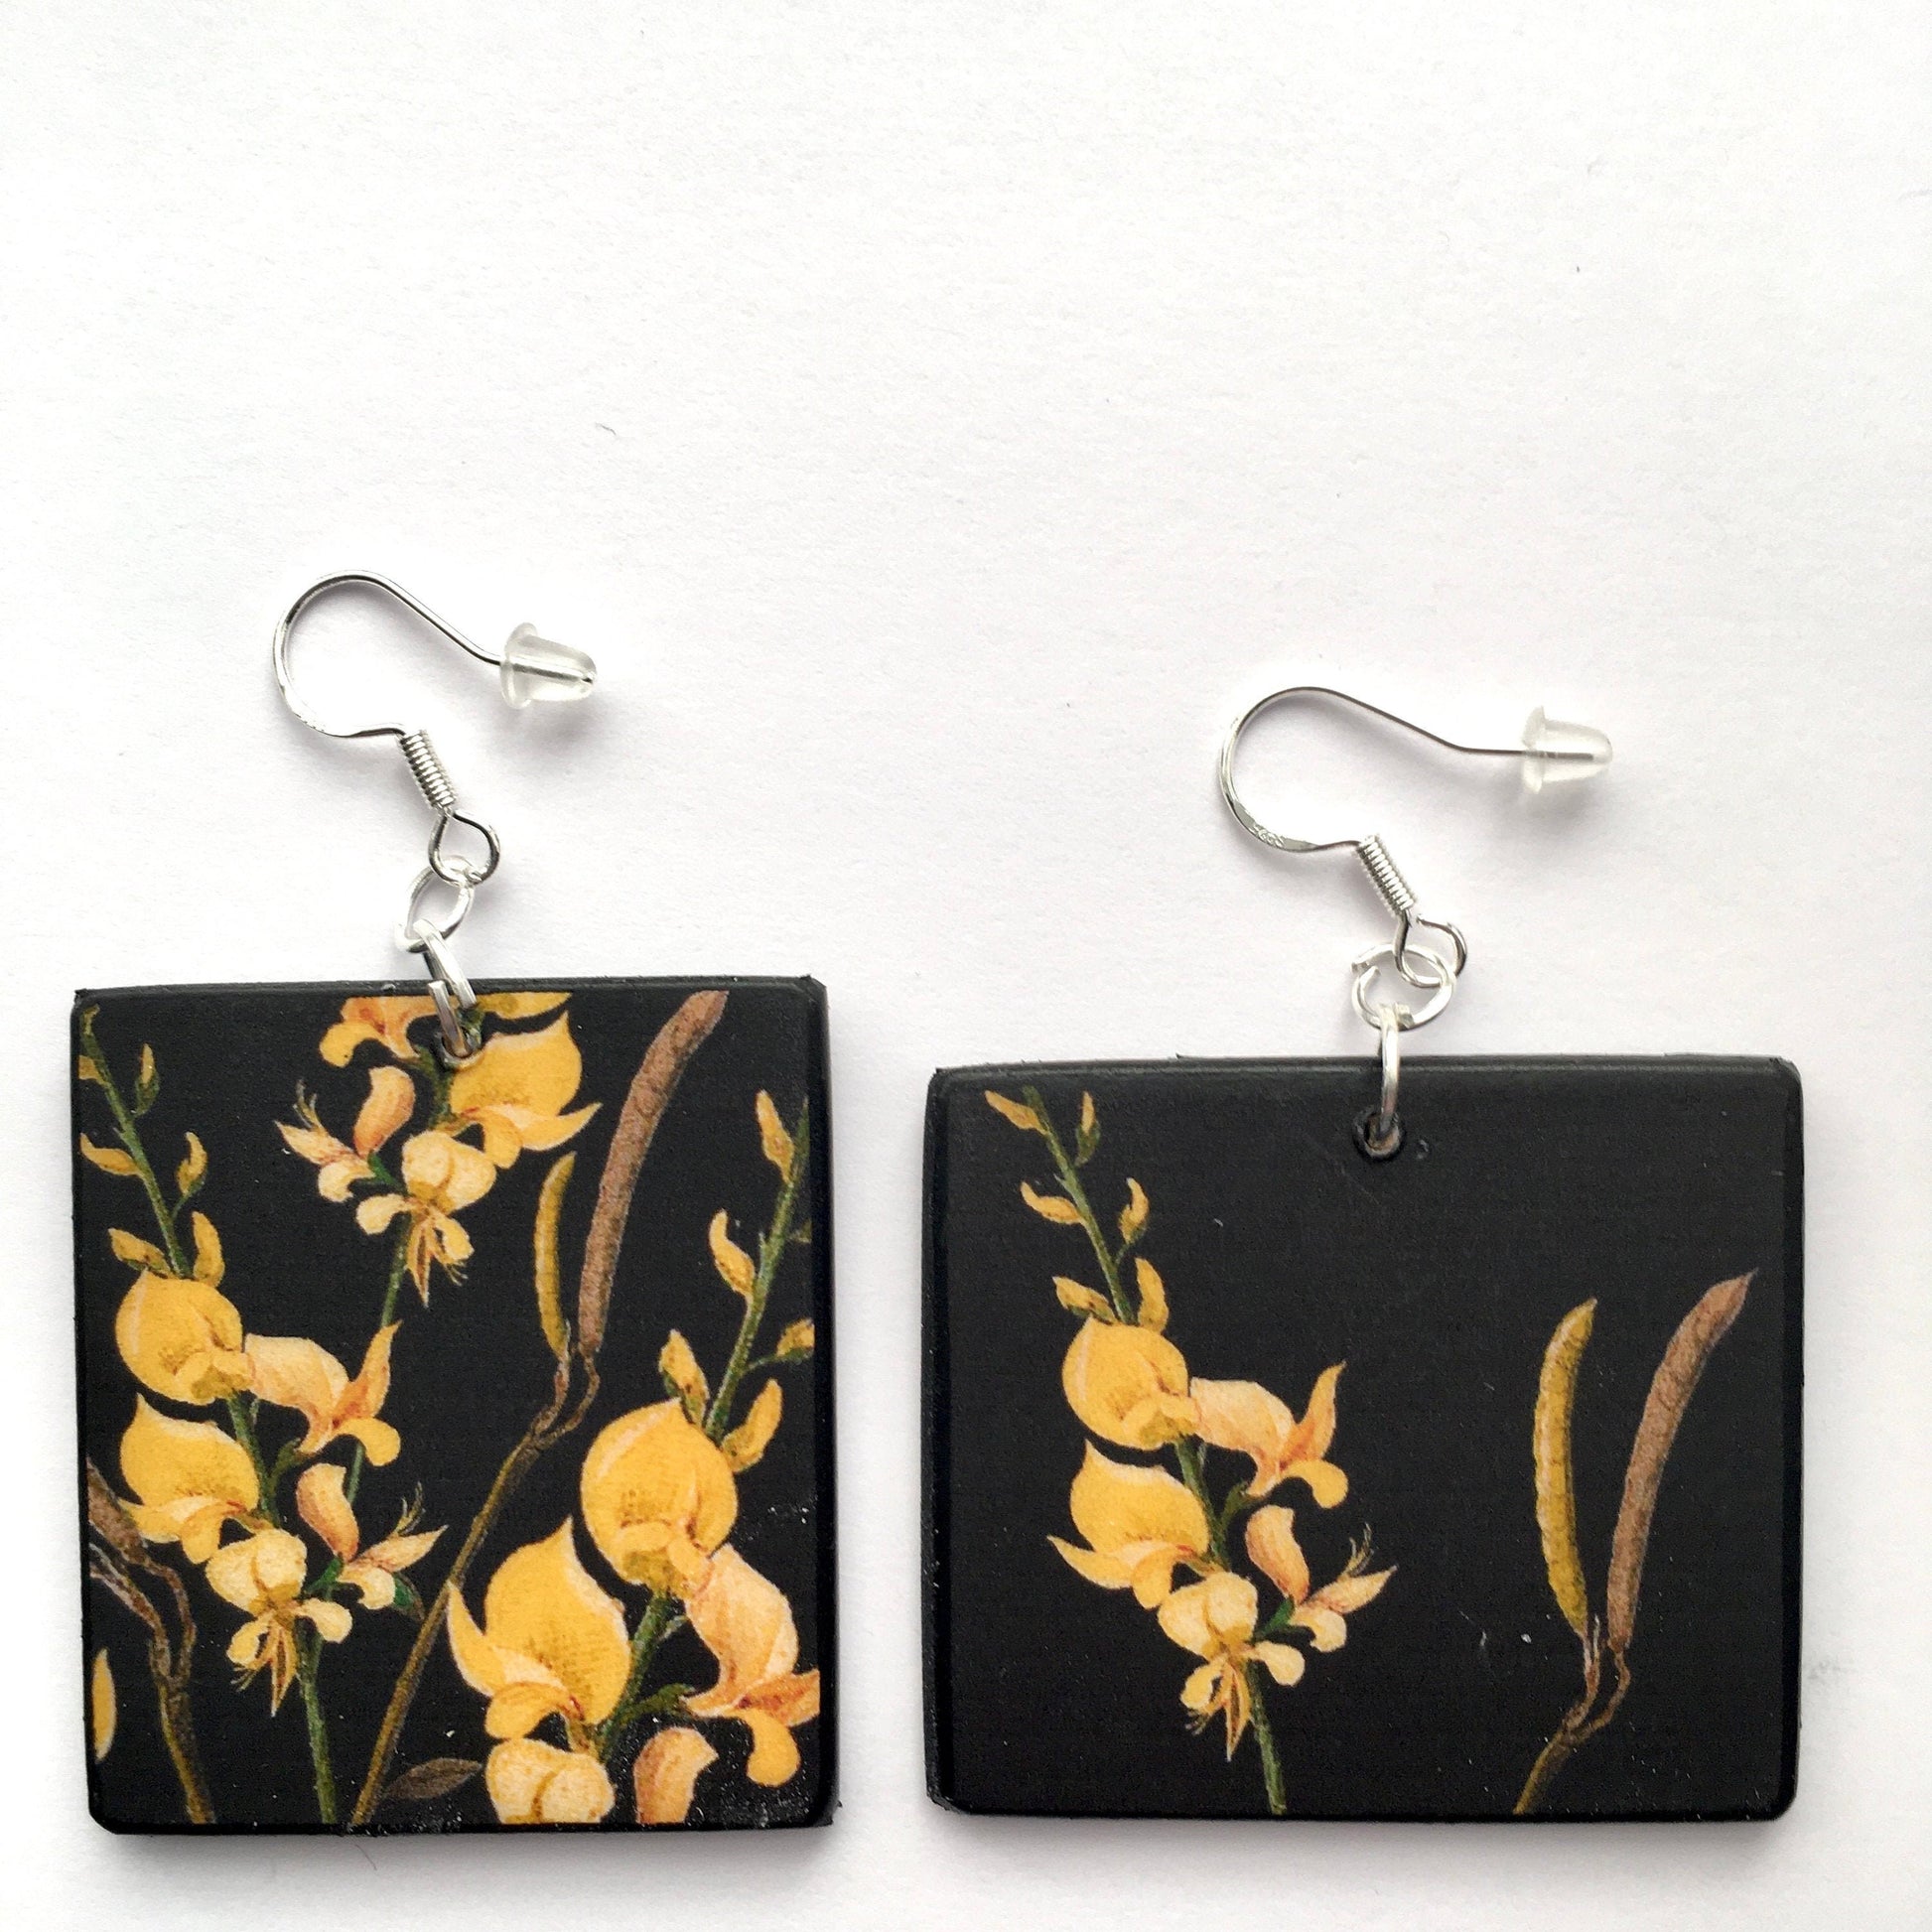 Artsy, asymmetrical floral earrings. Obljewellery inspired by artist Mary Delany ,botanical art, wooden and sterling silver earrings. 